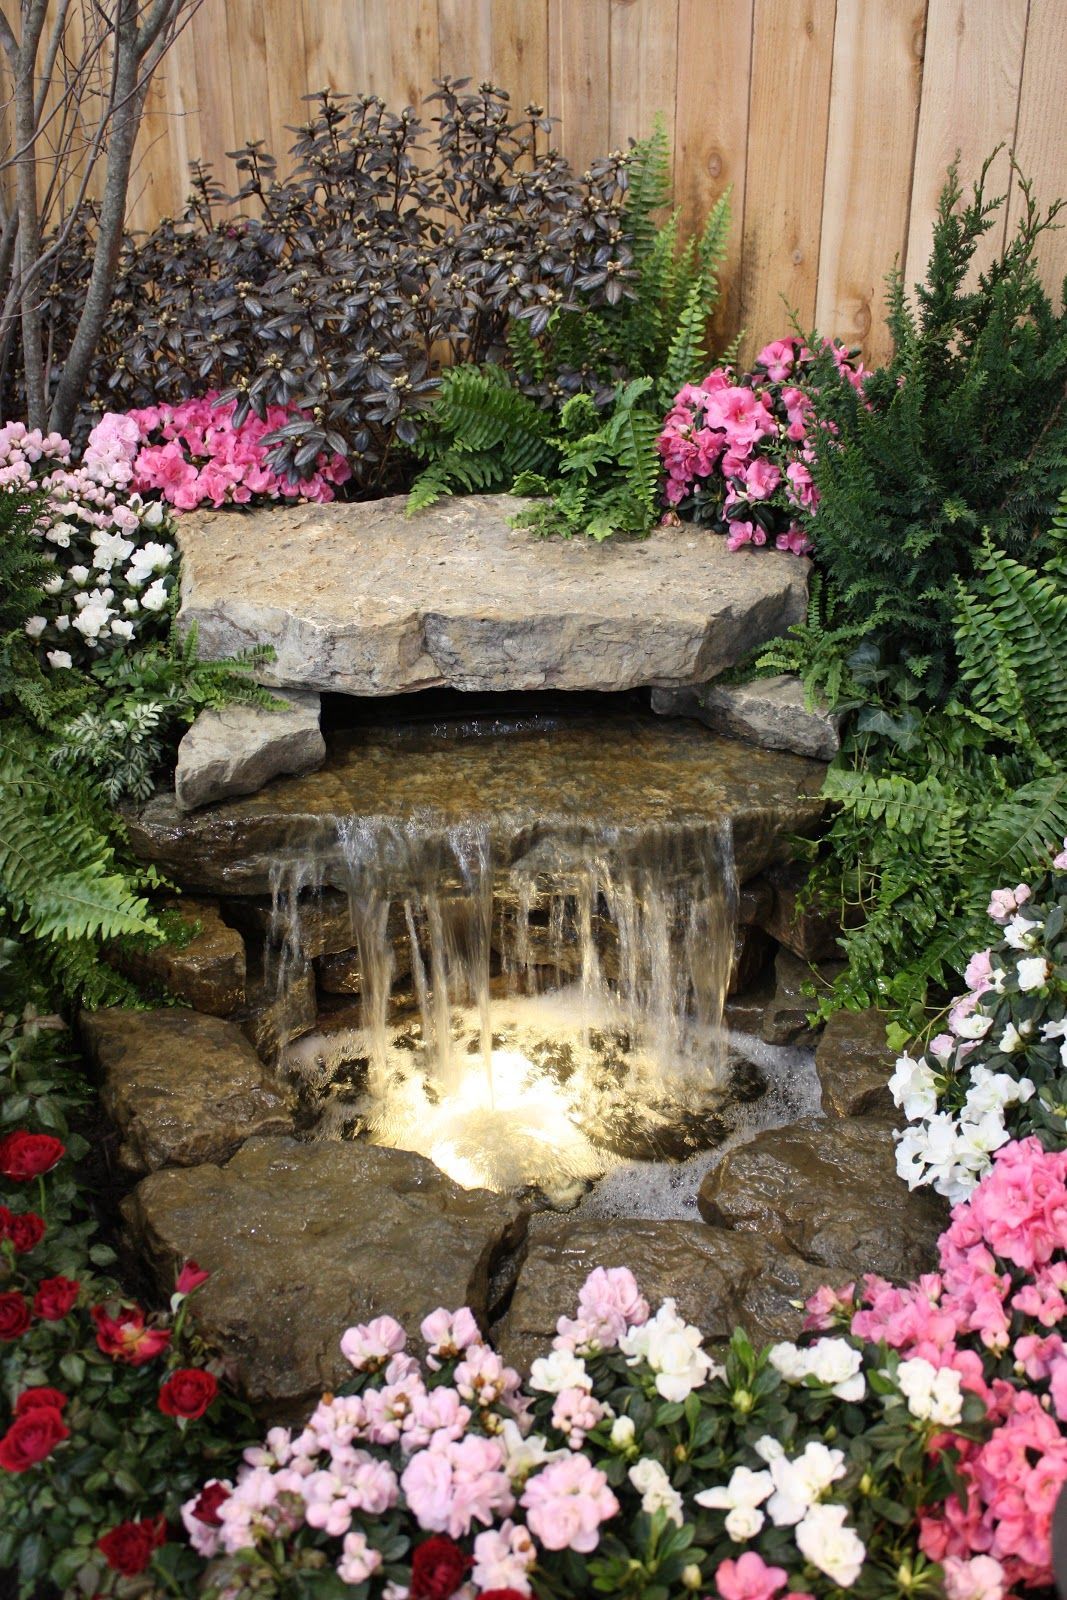 Garden Thyme with the Creative Gardener: More Great Water Features for the Garden